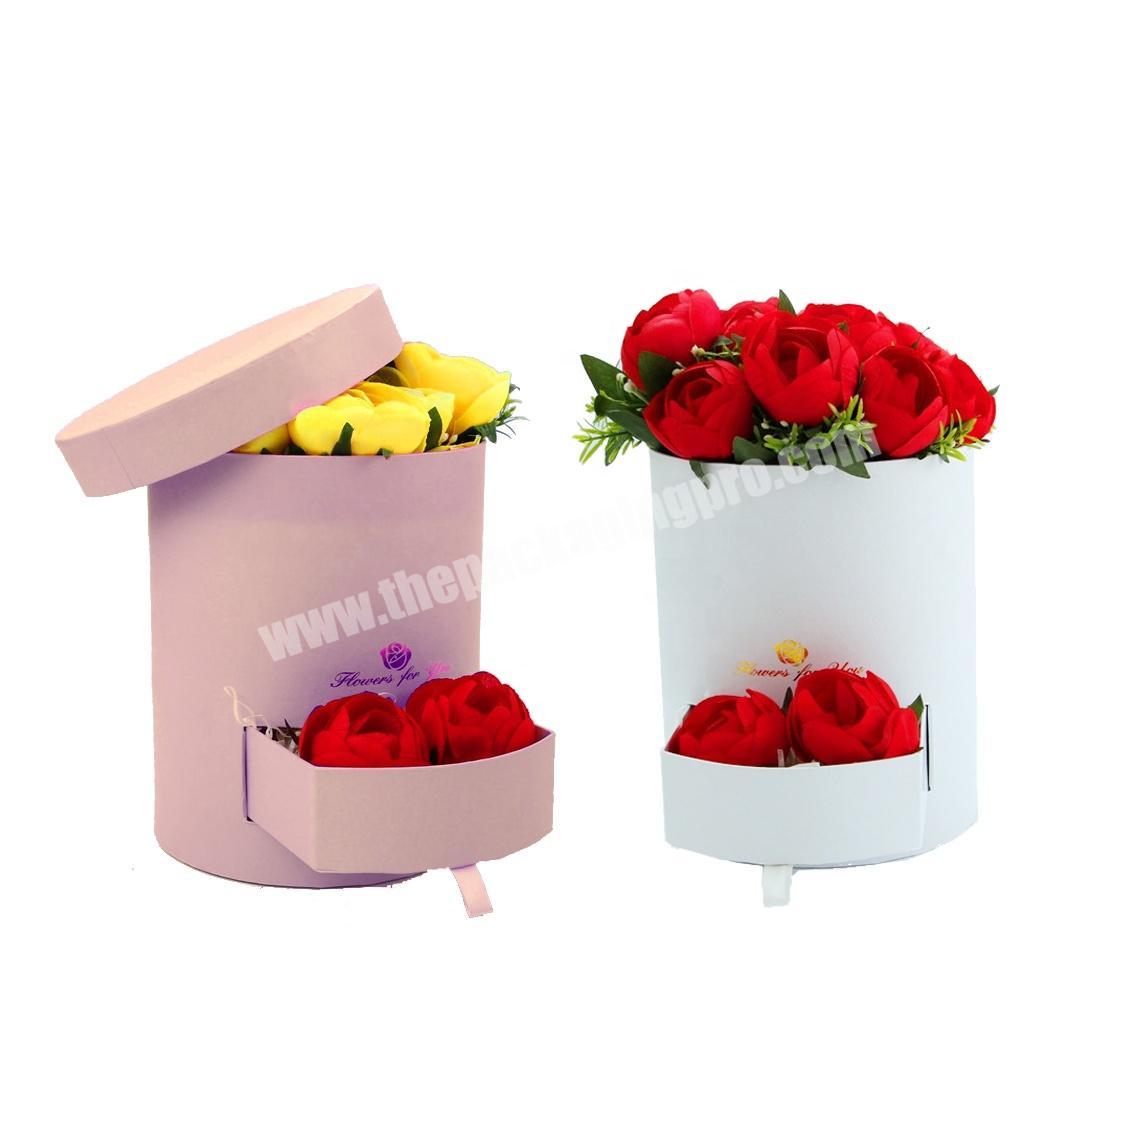 Round flowerbox cylinder gift cardboard boxes with lid manufacturer